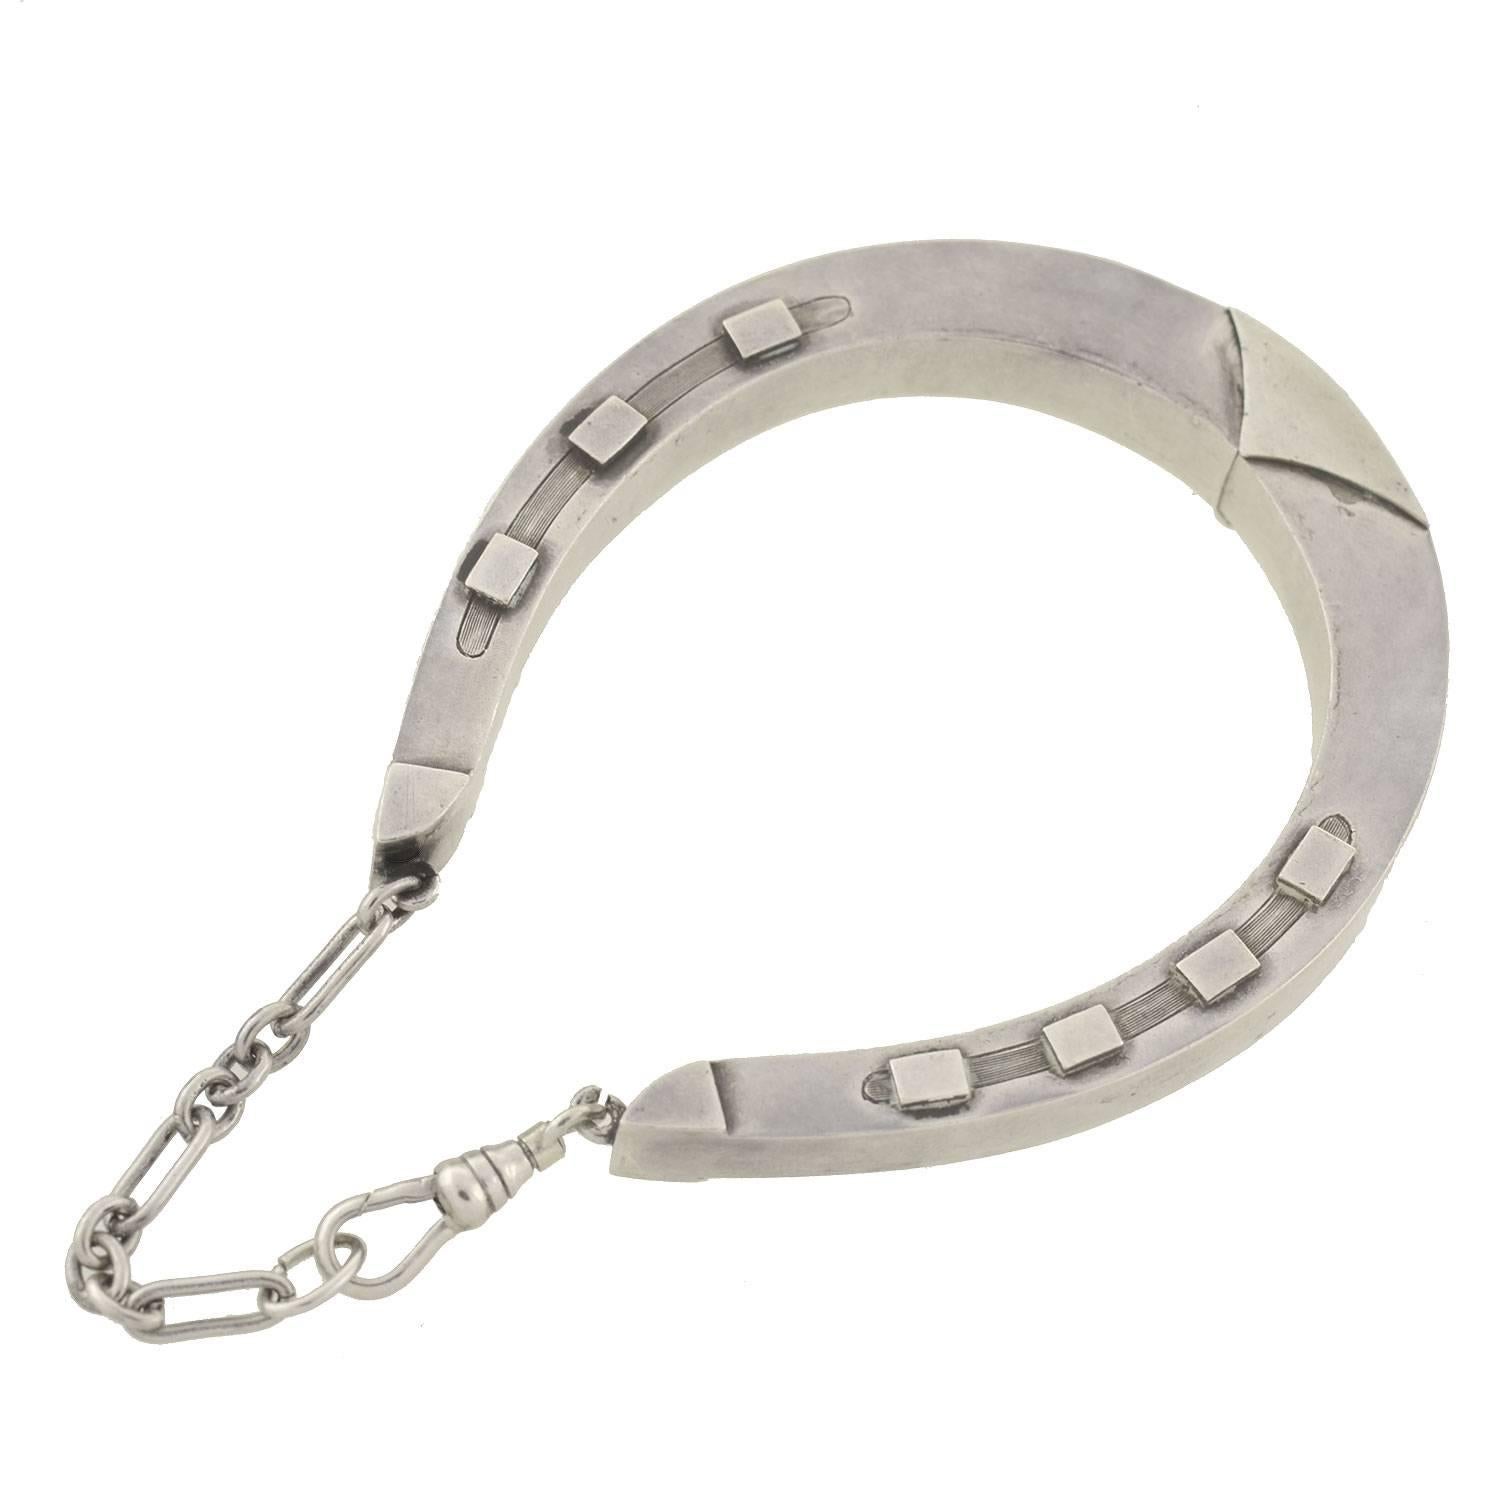 A fabulous horseshoe bracelet from the Victorian (ca1880) era! This gorgeous piece is made of sterling silver and forms the shape of a large horseshoe. Both sides of the reversible bracelet are detailed with 7 raised nails (always 7 for good luck!)